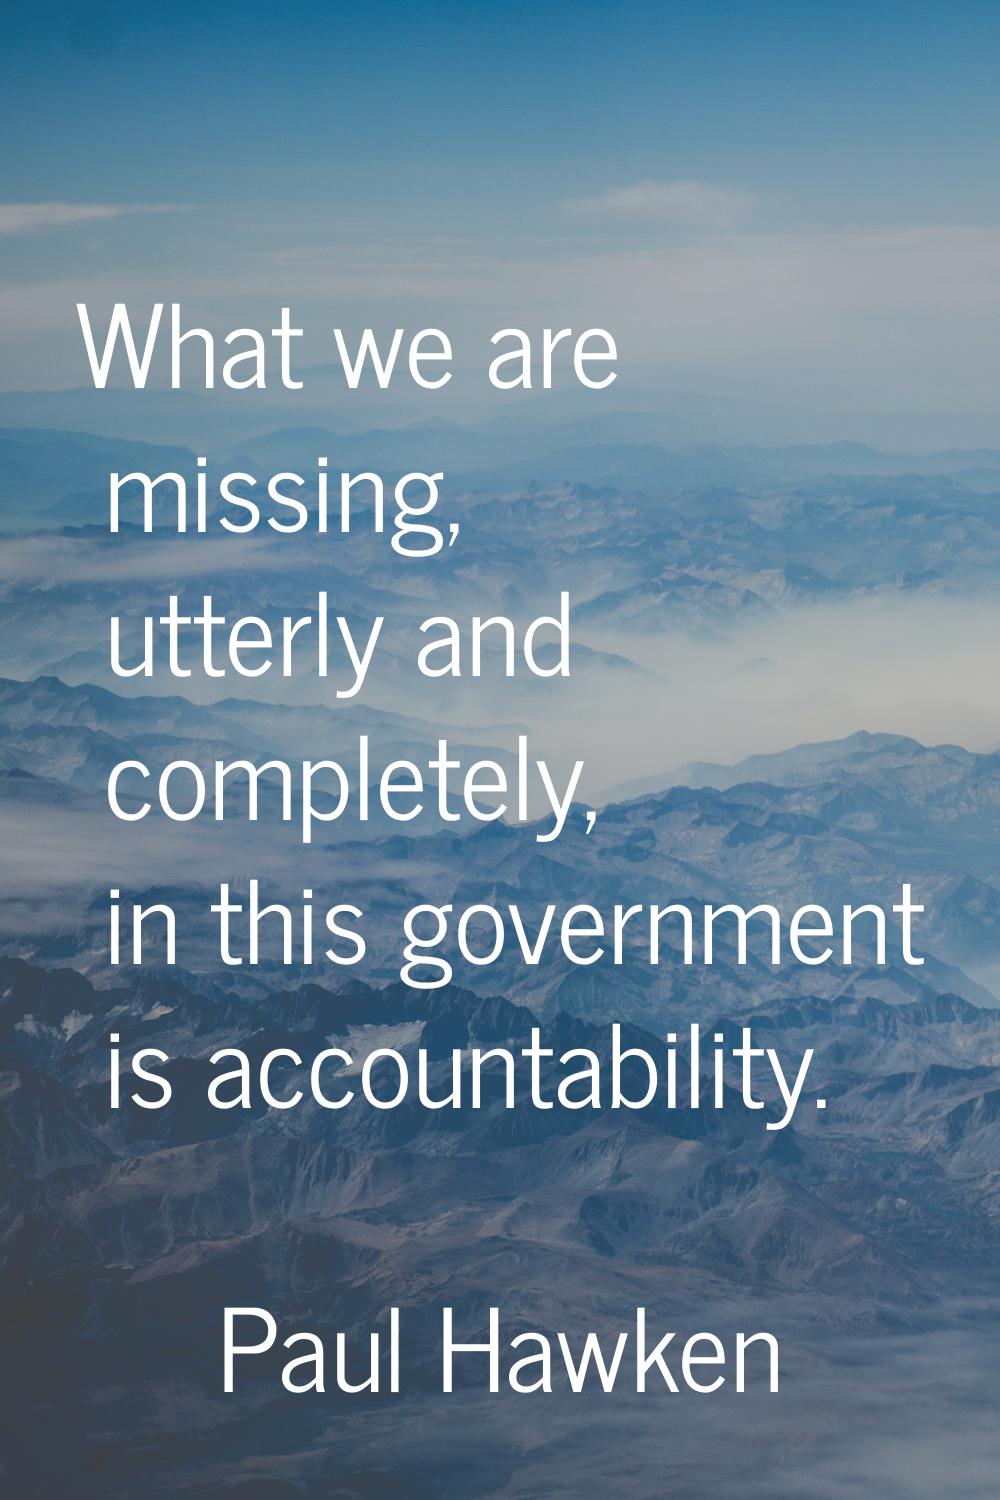 What we are missing, utterly and completely, in this government is accountability.